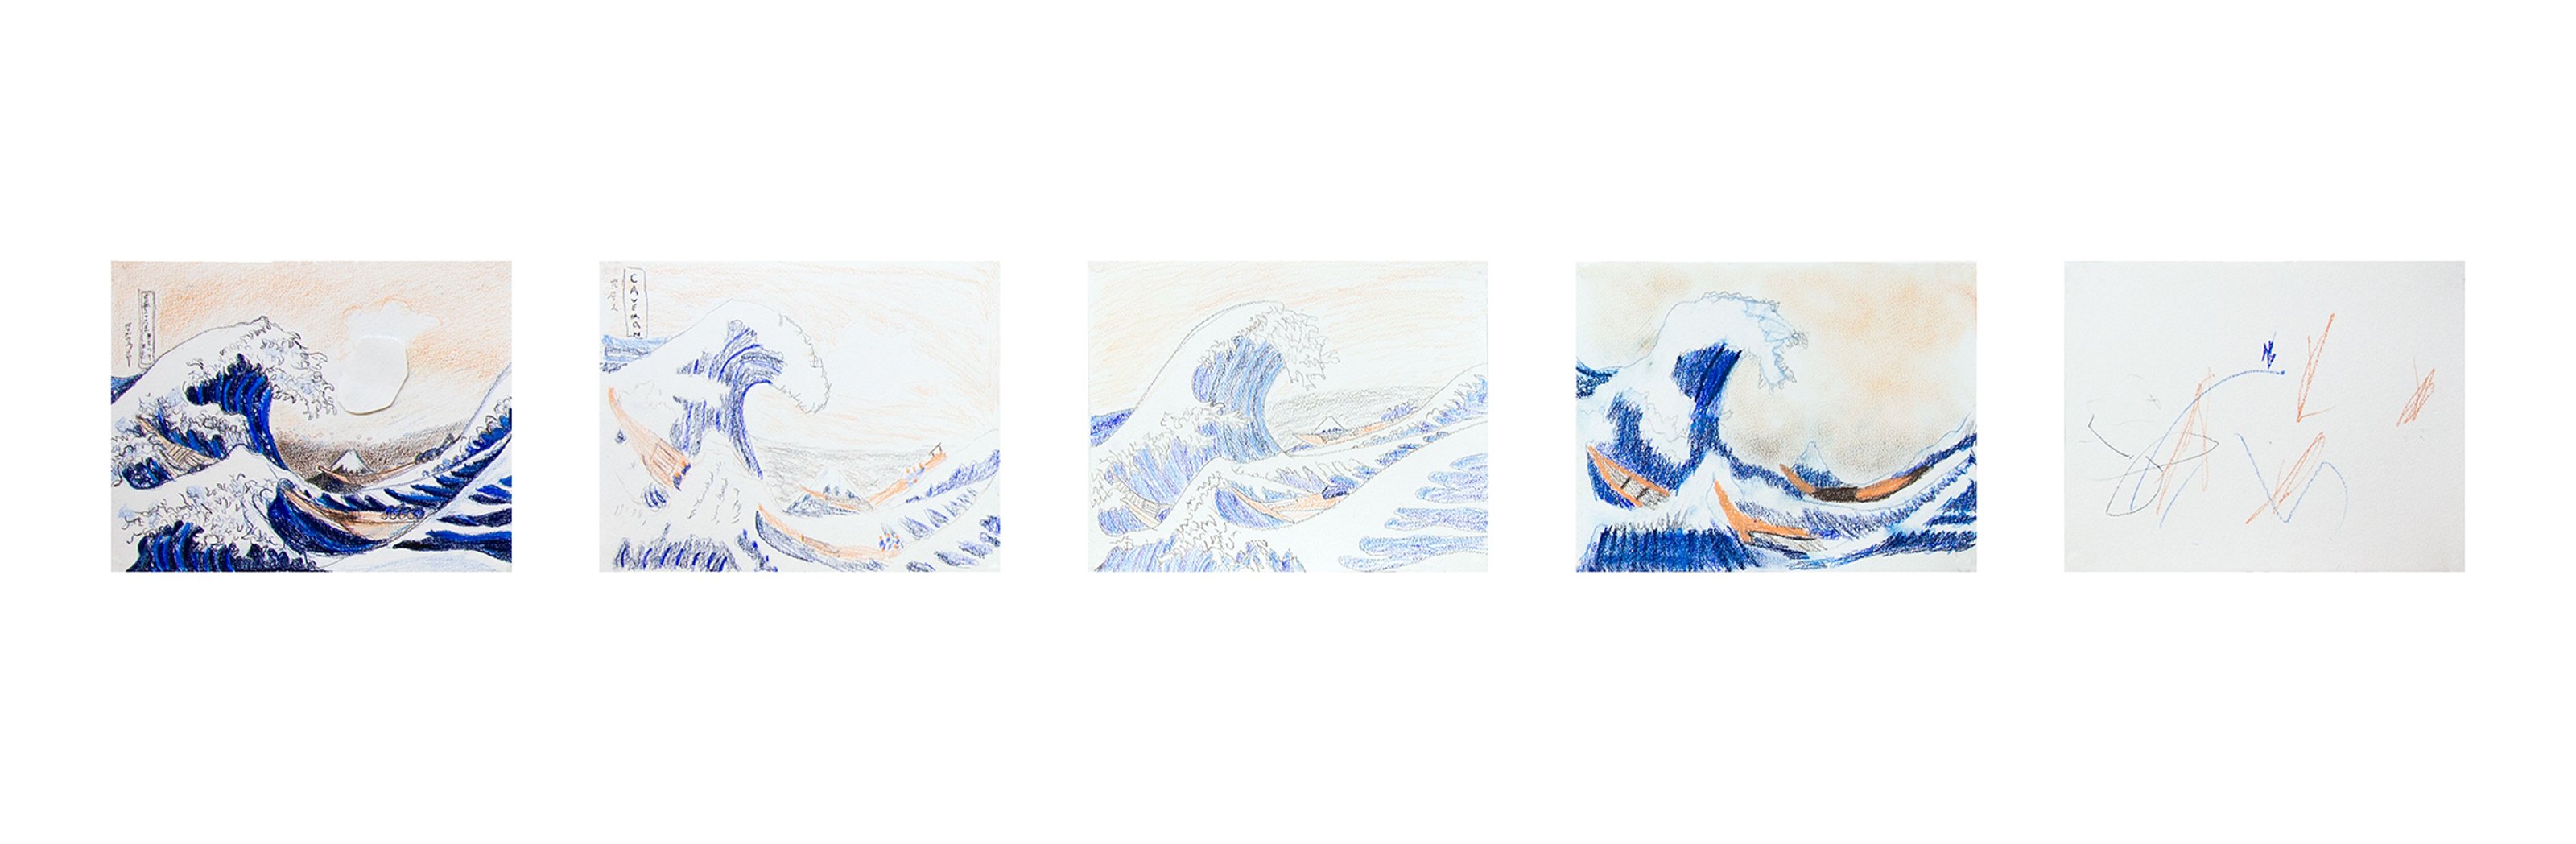 Five drawings of Hokusai's The Great Wave off Kanagawa, depicting a large wave